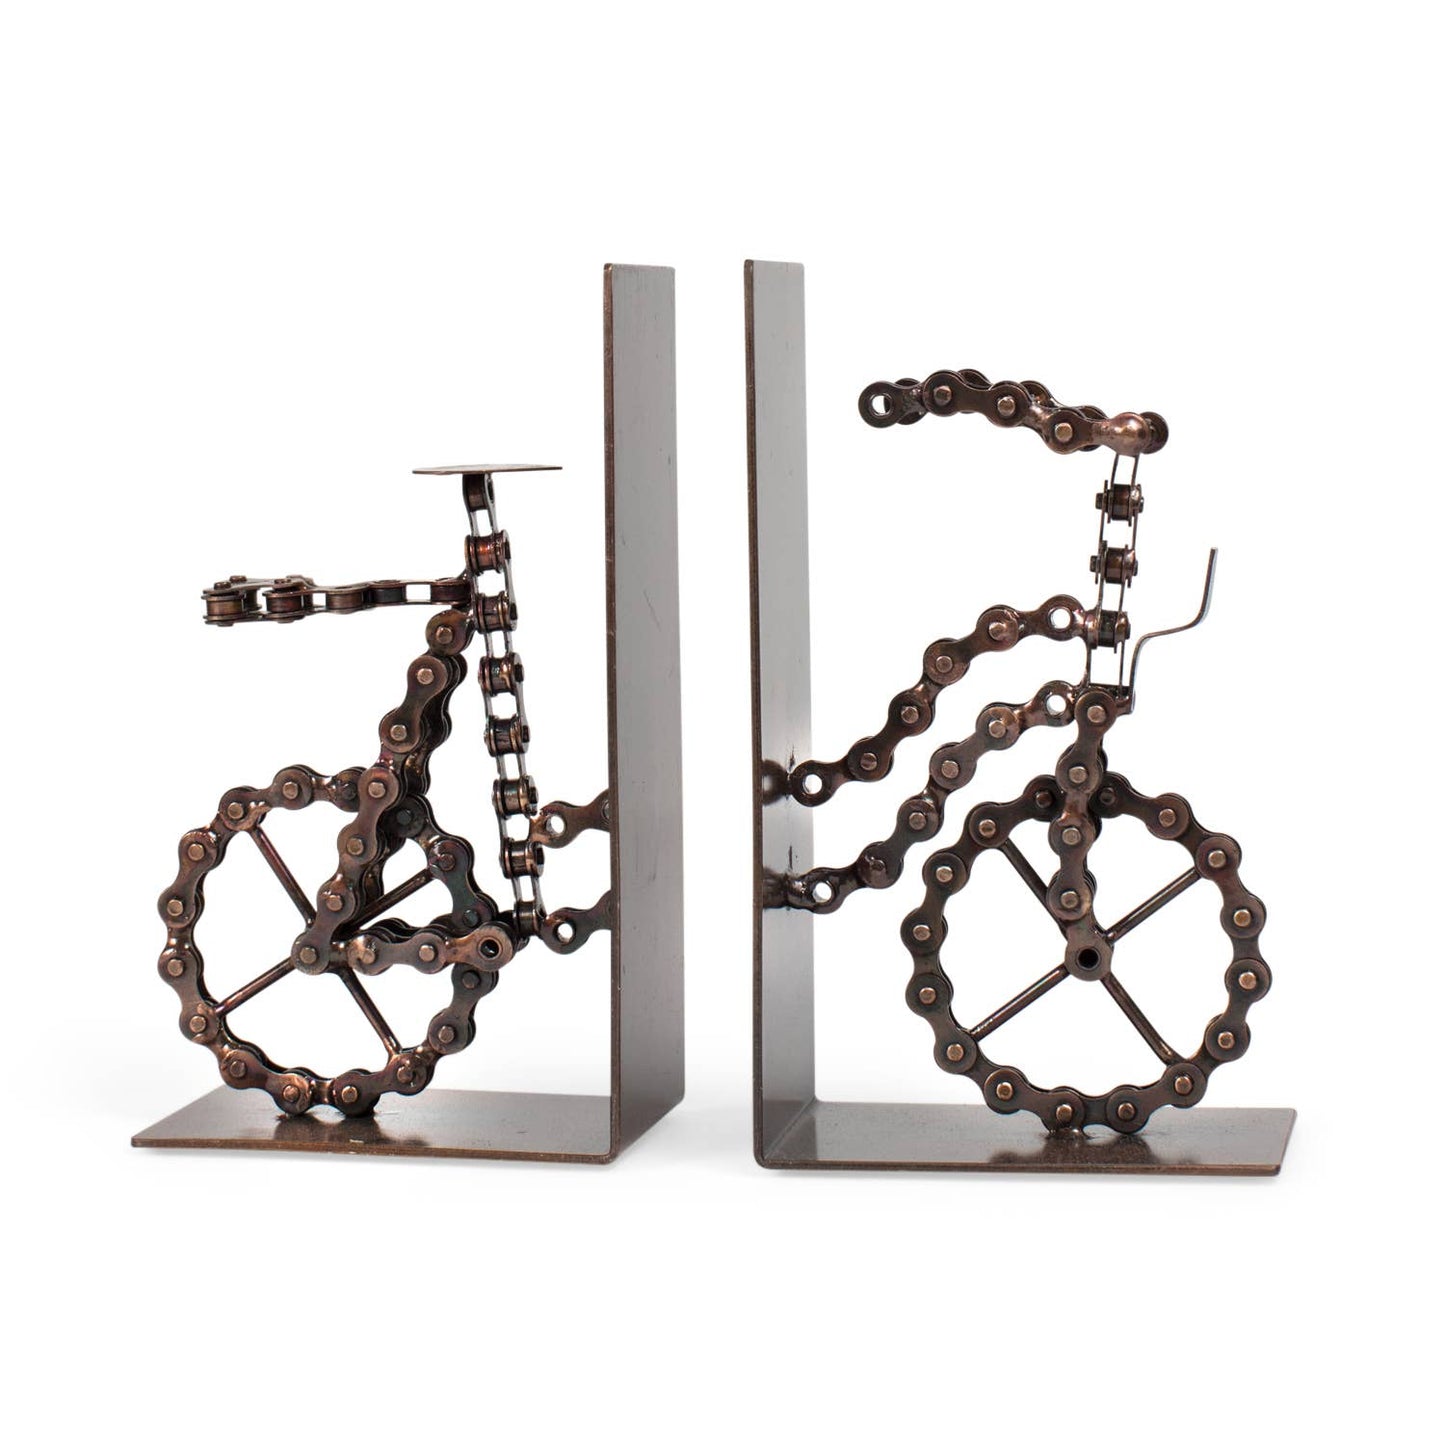 Ten Thousand Villages - Bicycle Chain Bookends - Fenwick & OliverTen Thousand Villages - Bicycle Chain BookendsTen Thousand VillagesFenwick & Oliver6821530